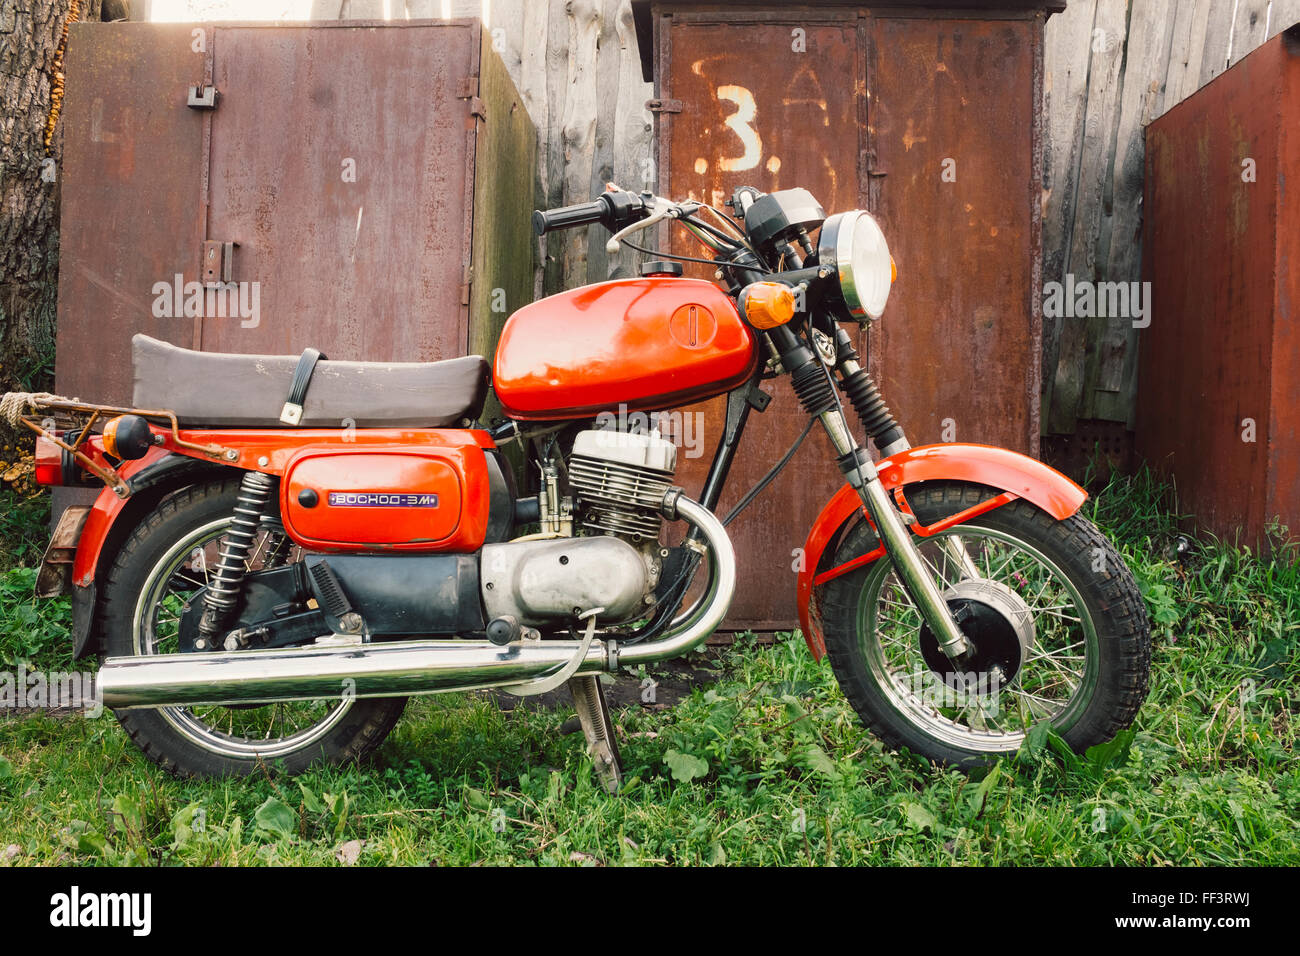 Russian Motorcycle High Resolution Stock Photography and Images - Alamy